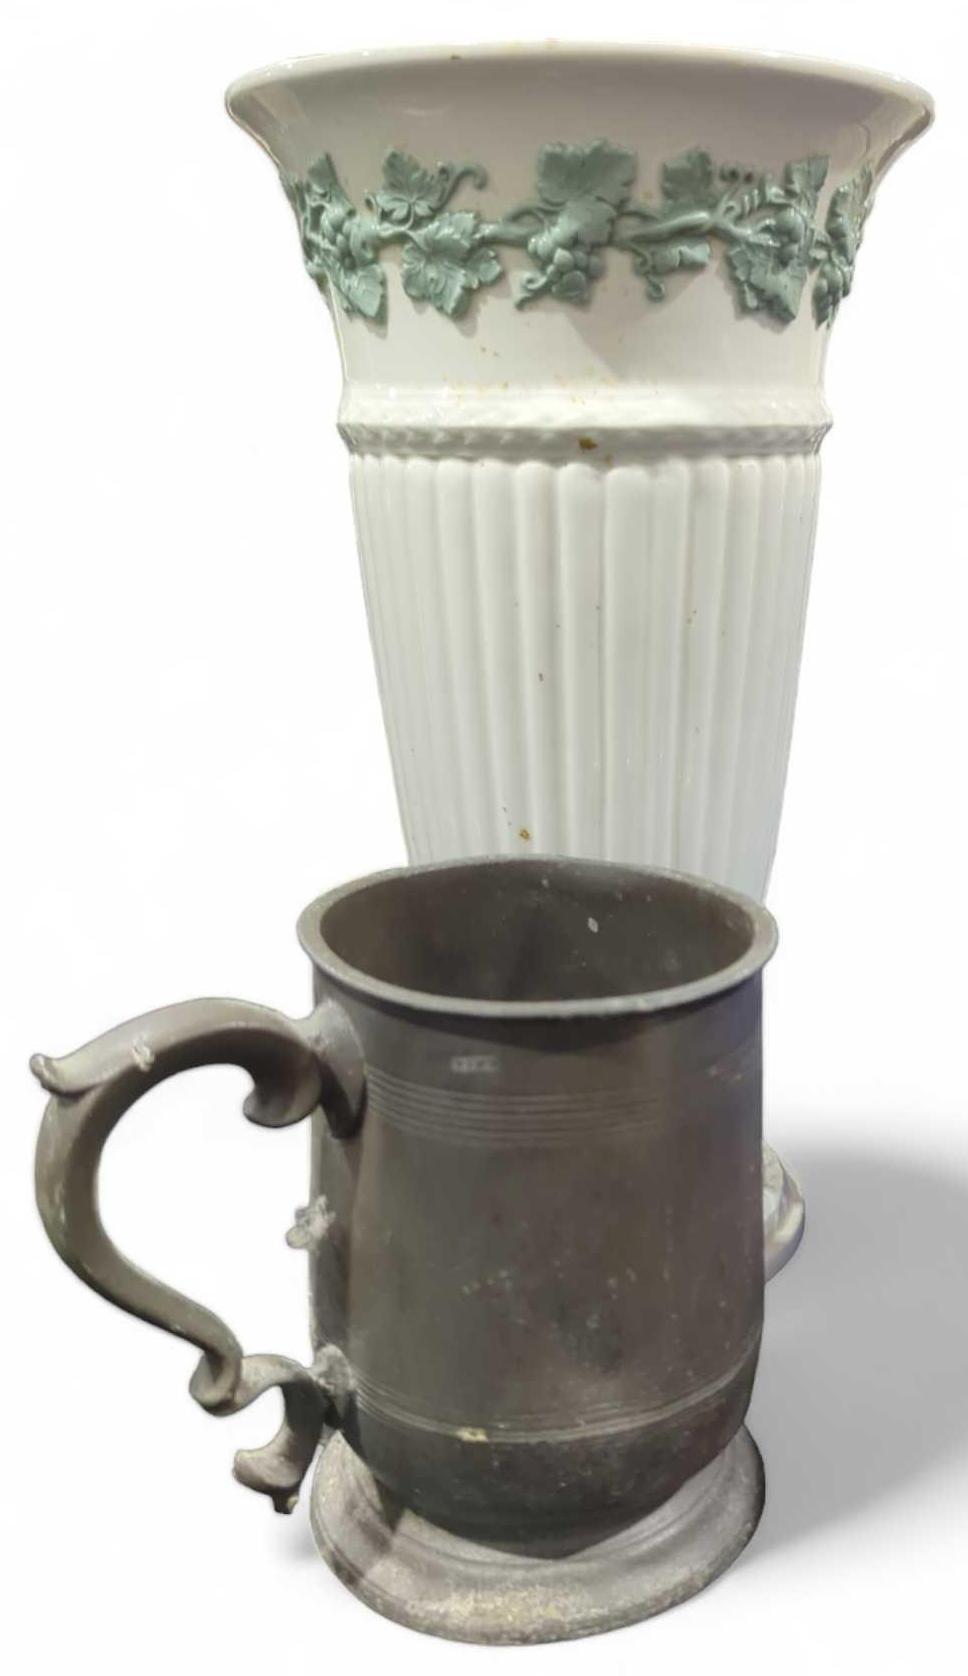 Wedgwood Queens ware vase, pewter mug and other items - Image 4 of 4